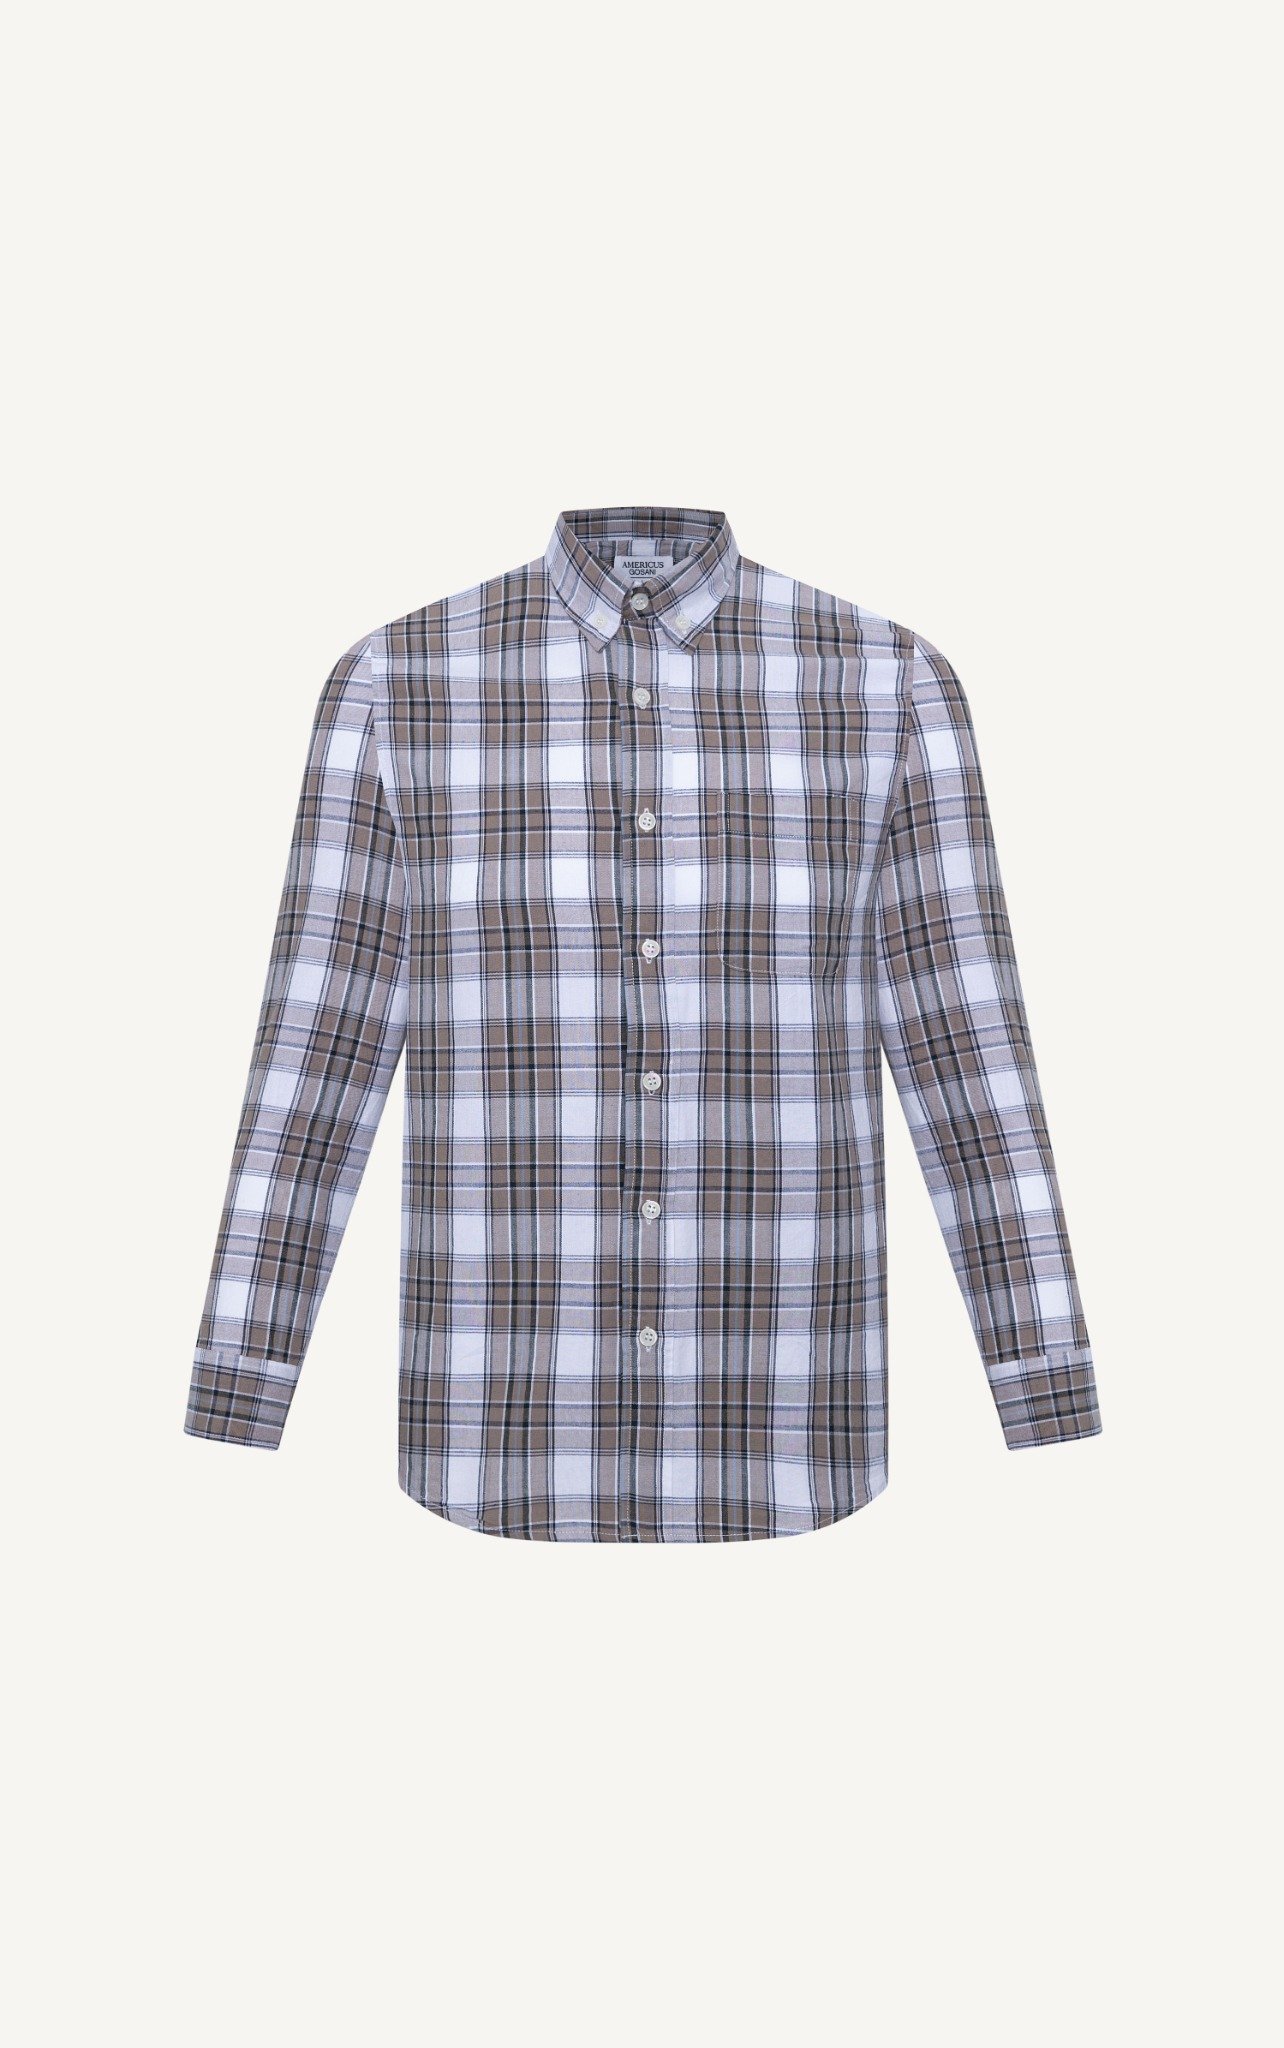 AG313 FACTORY REGULAR FIT CHECKED SHIRT - BEIGE